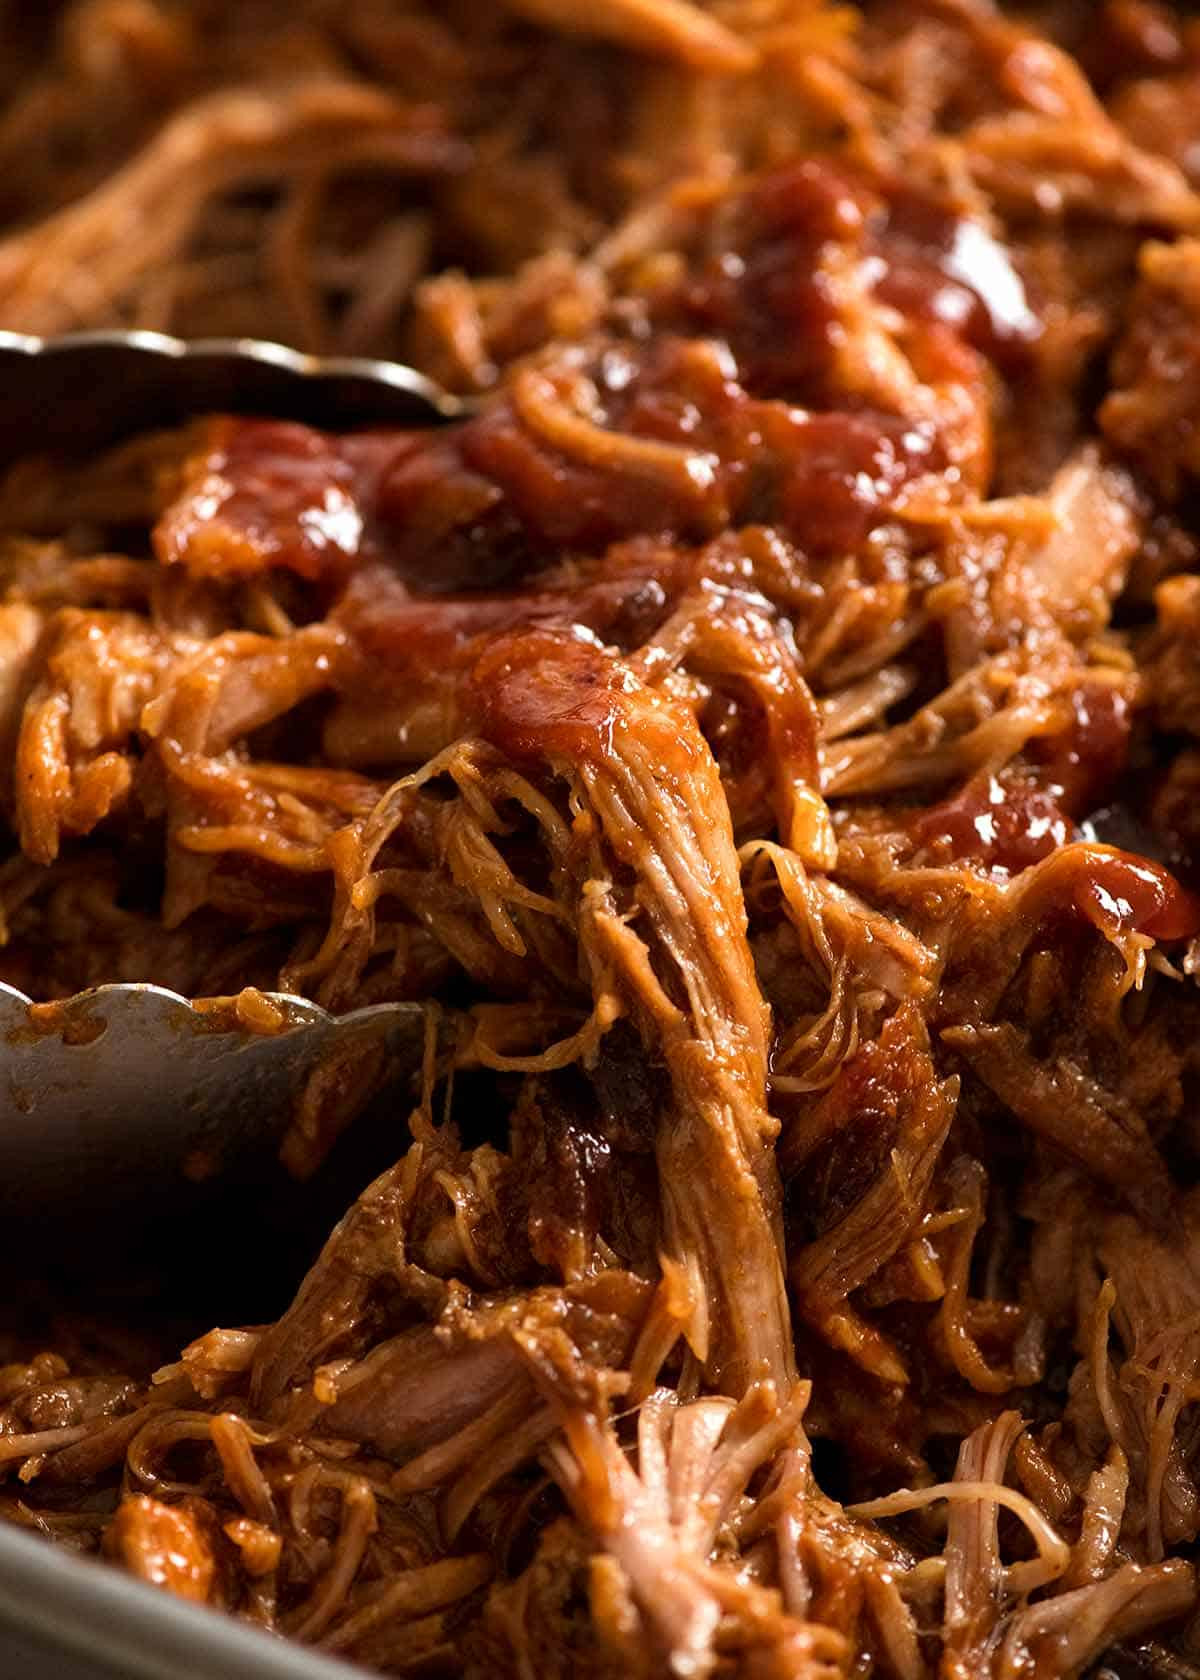 Pulled Pork Bbq Sauce Awesome Pulled Pork with Bbq Sauce